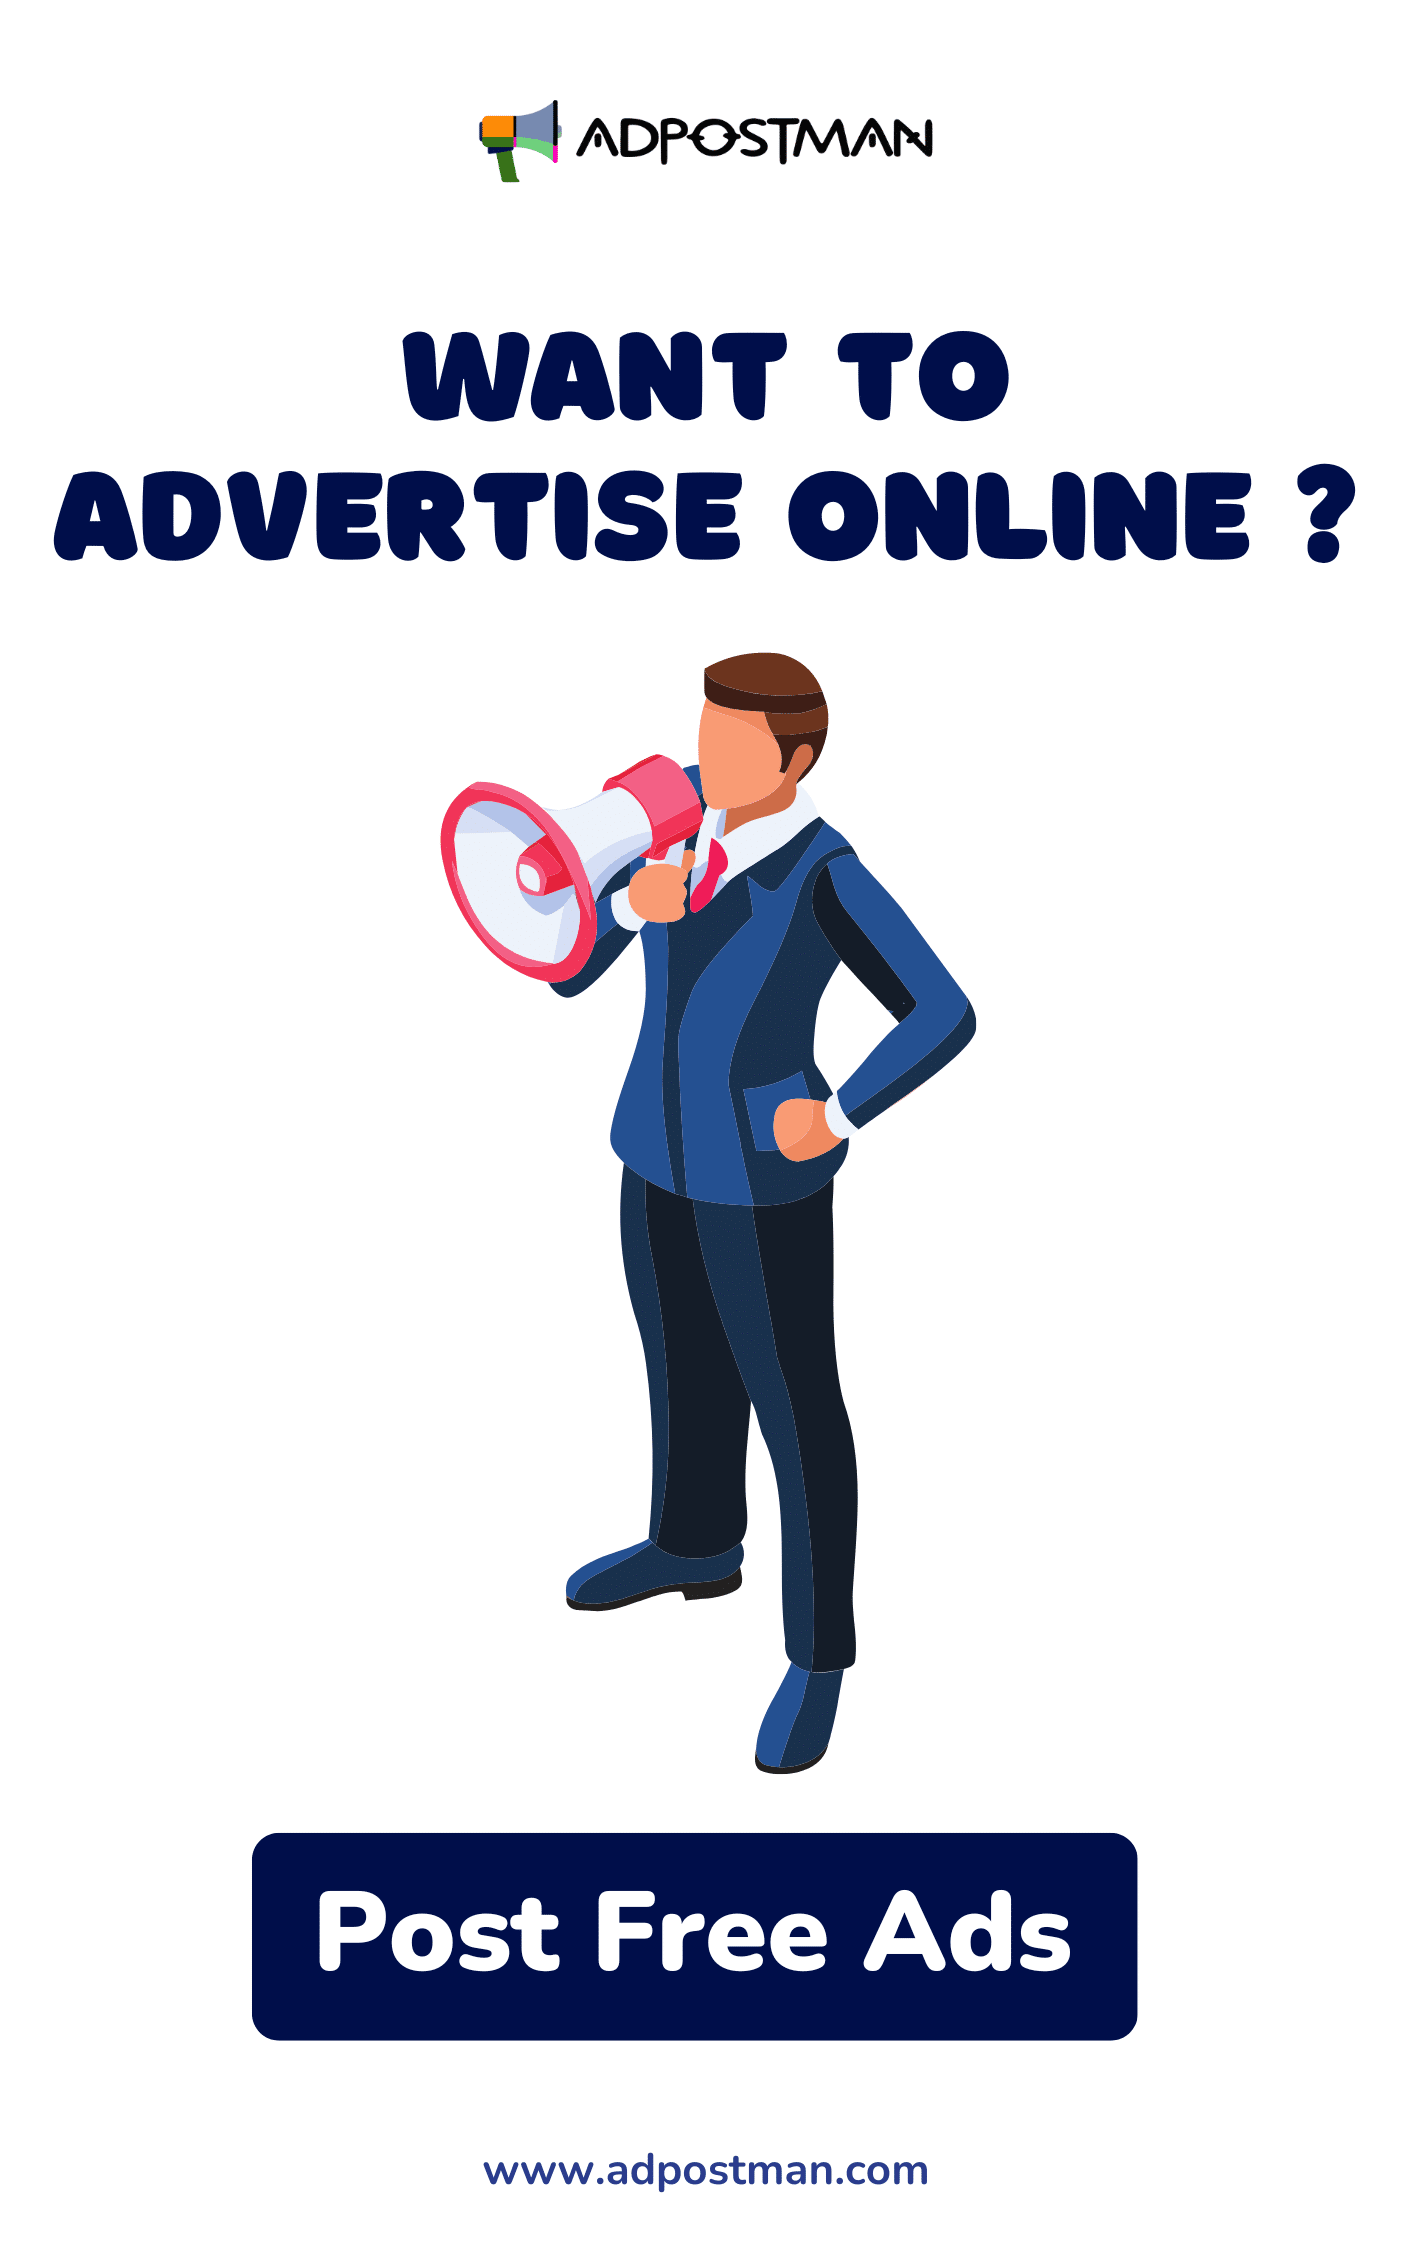 ADPOSTMAN - Want to Advertise Online (1412 × 2260 px)